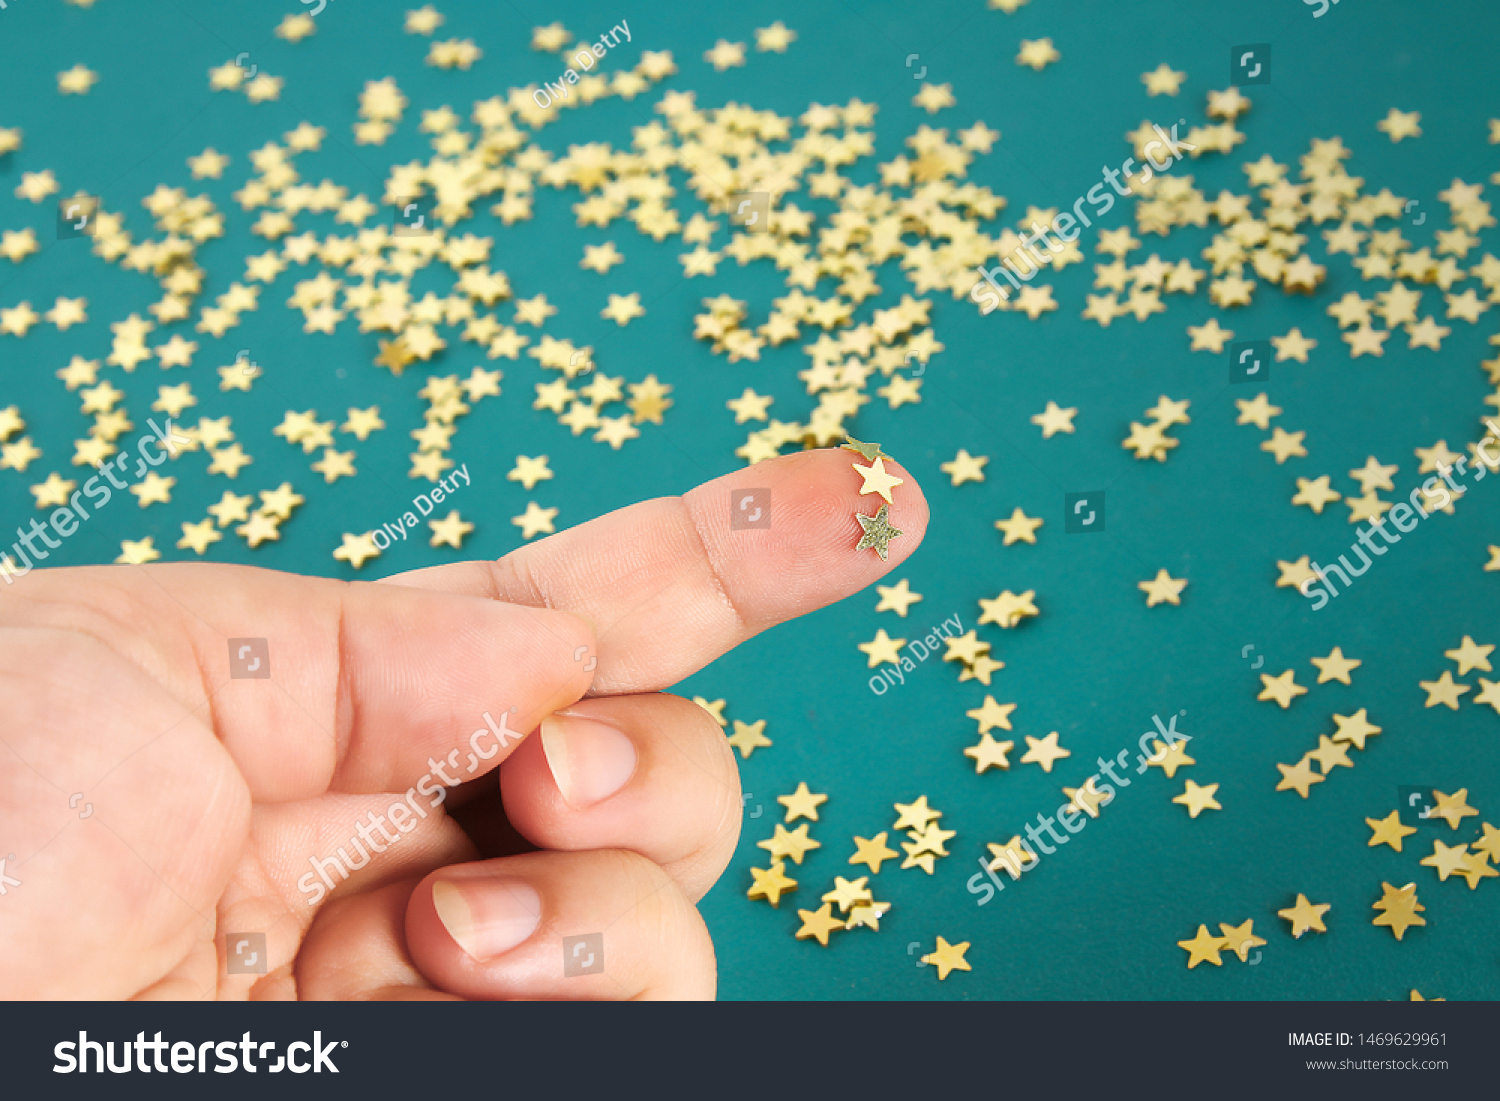 Hand touches solid confetti in the form of stars. The concept of touch, tactility, feelings. #1469629961